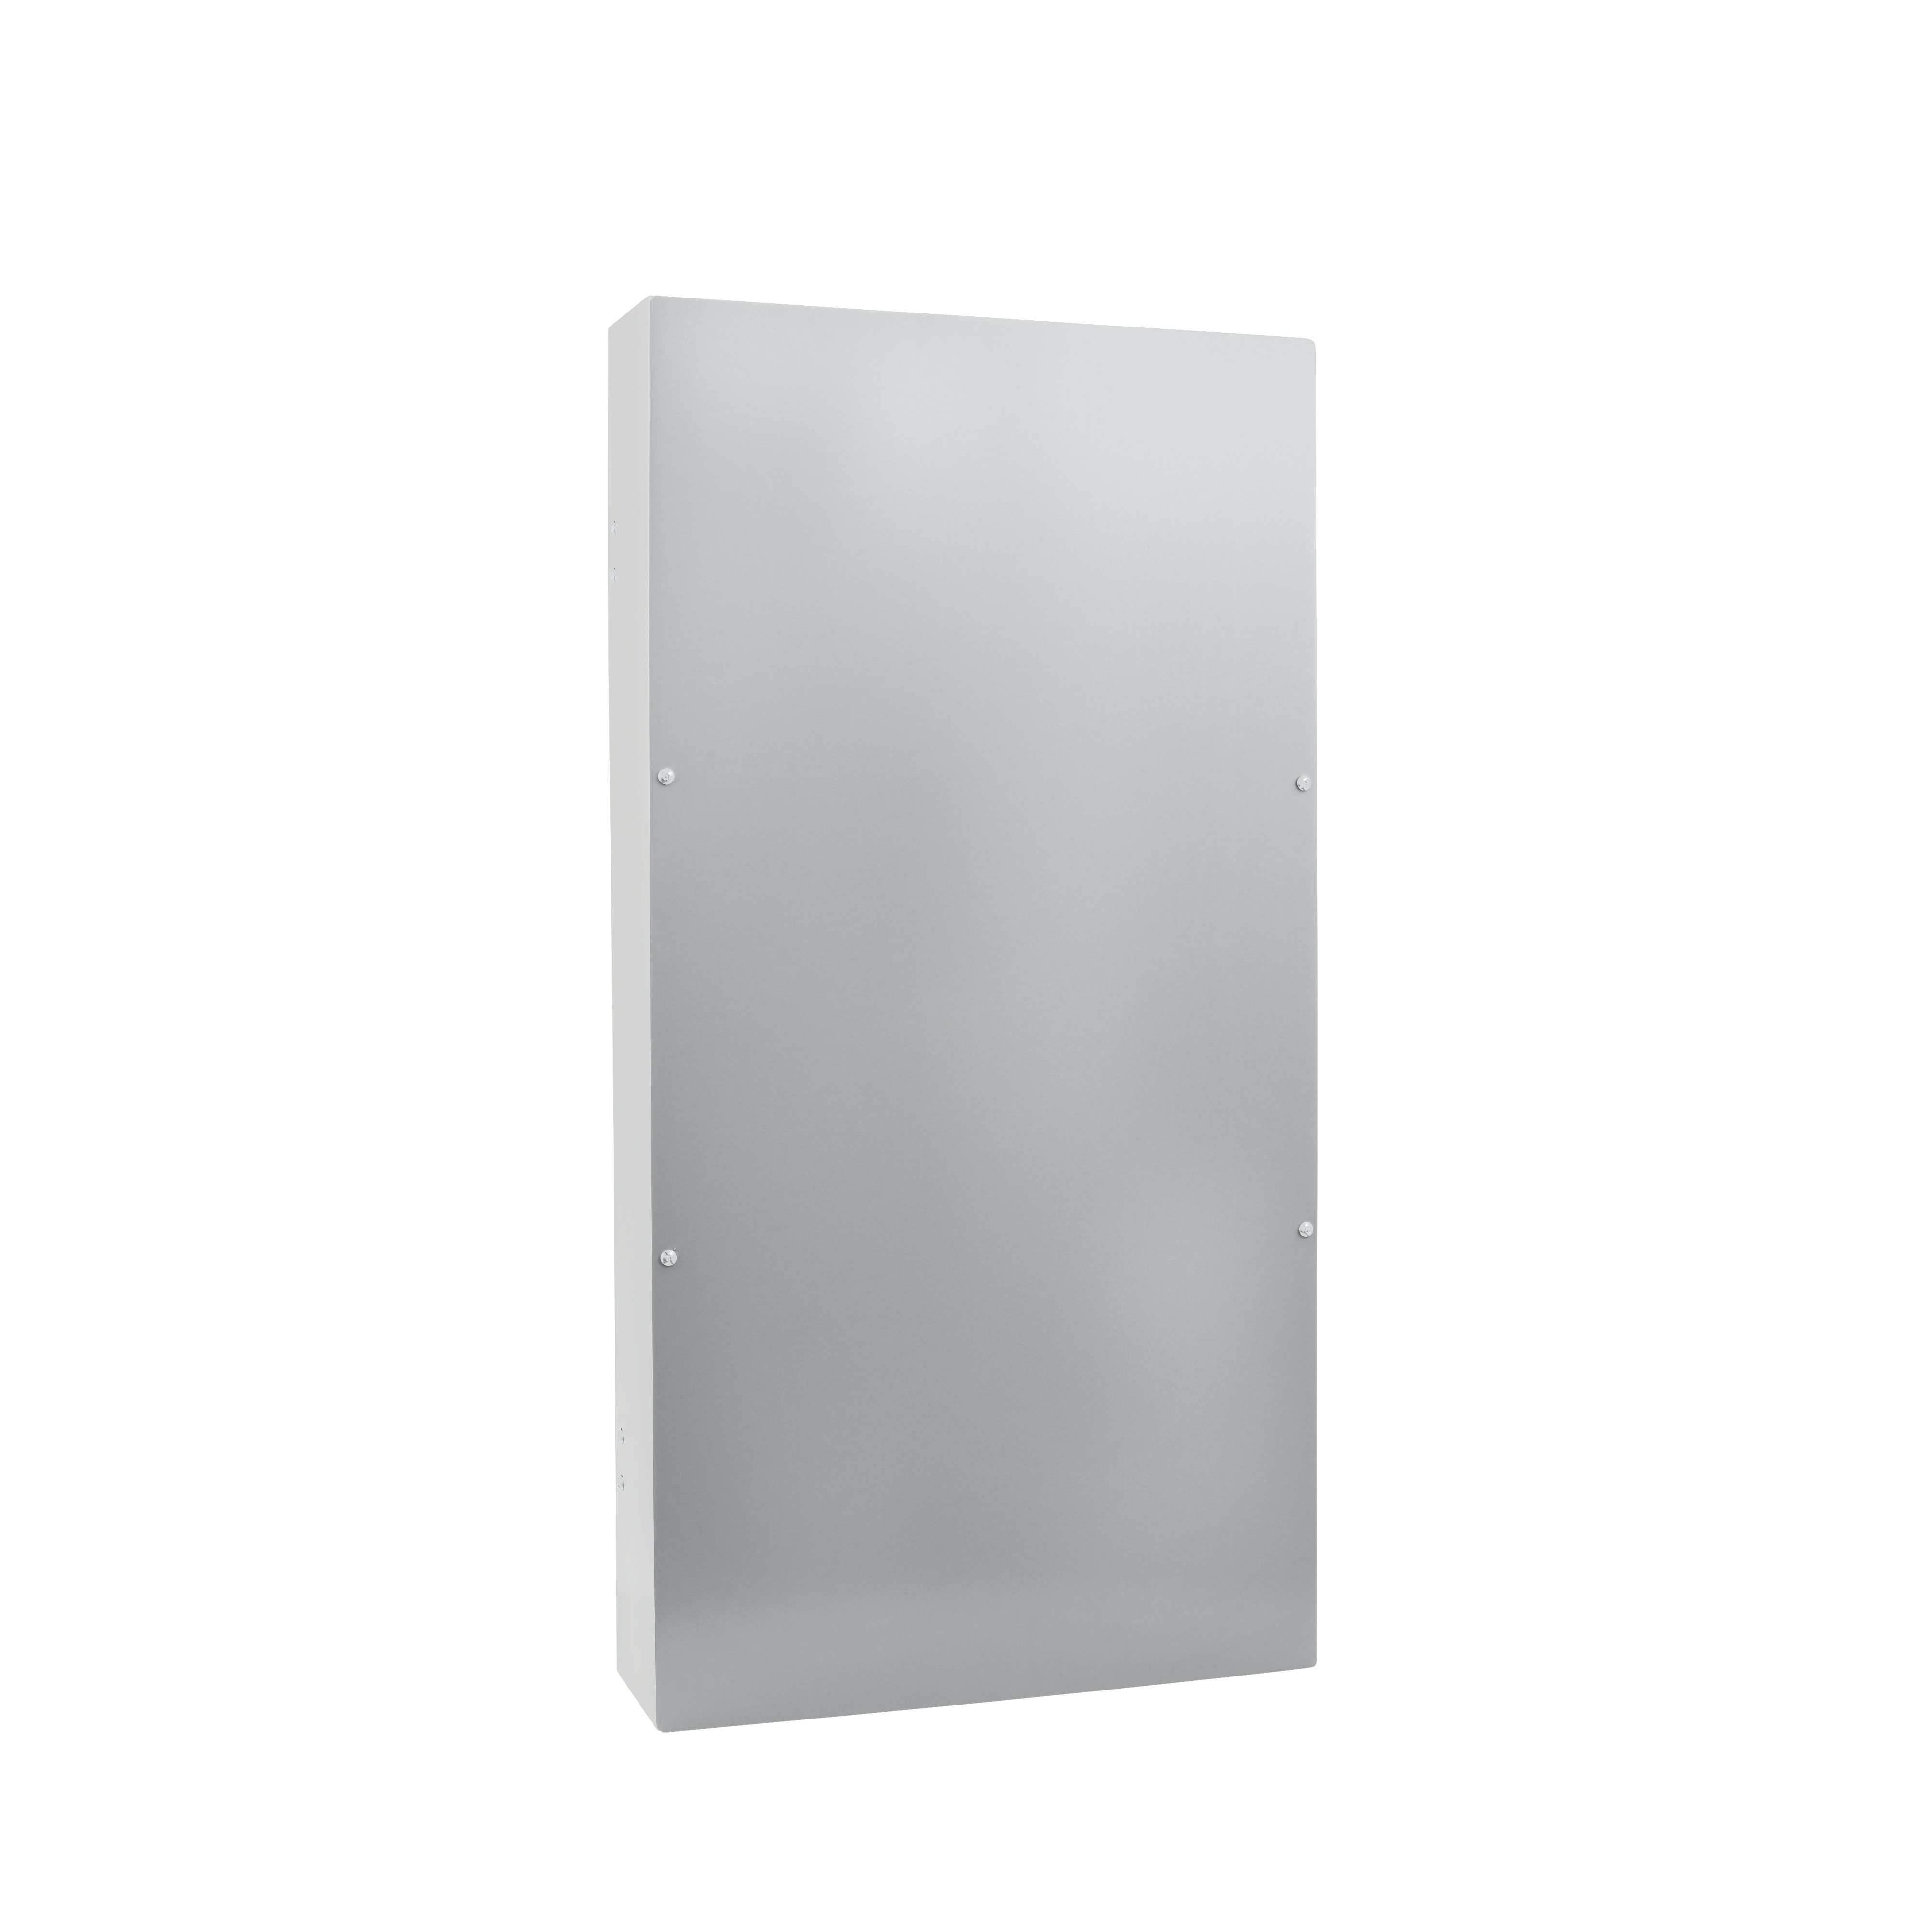 Enclosure Panel Skirt Assembly, NQNF, Type 1, 20x31x5.75in